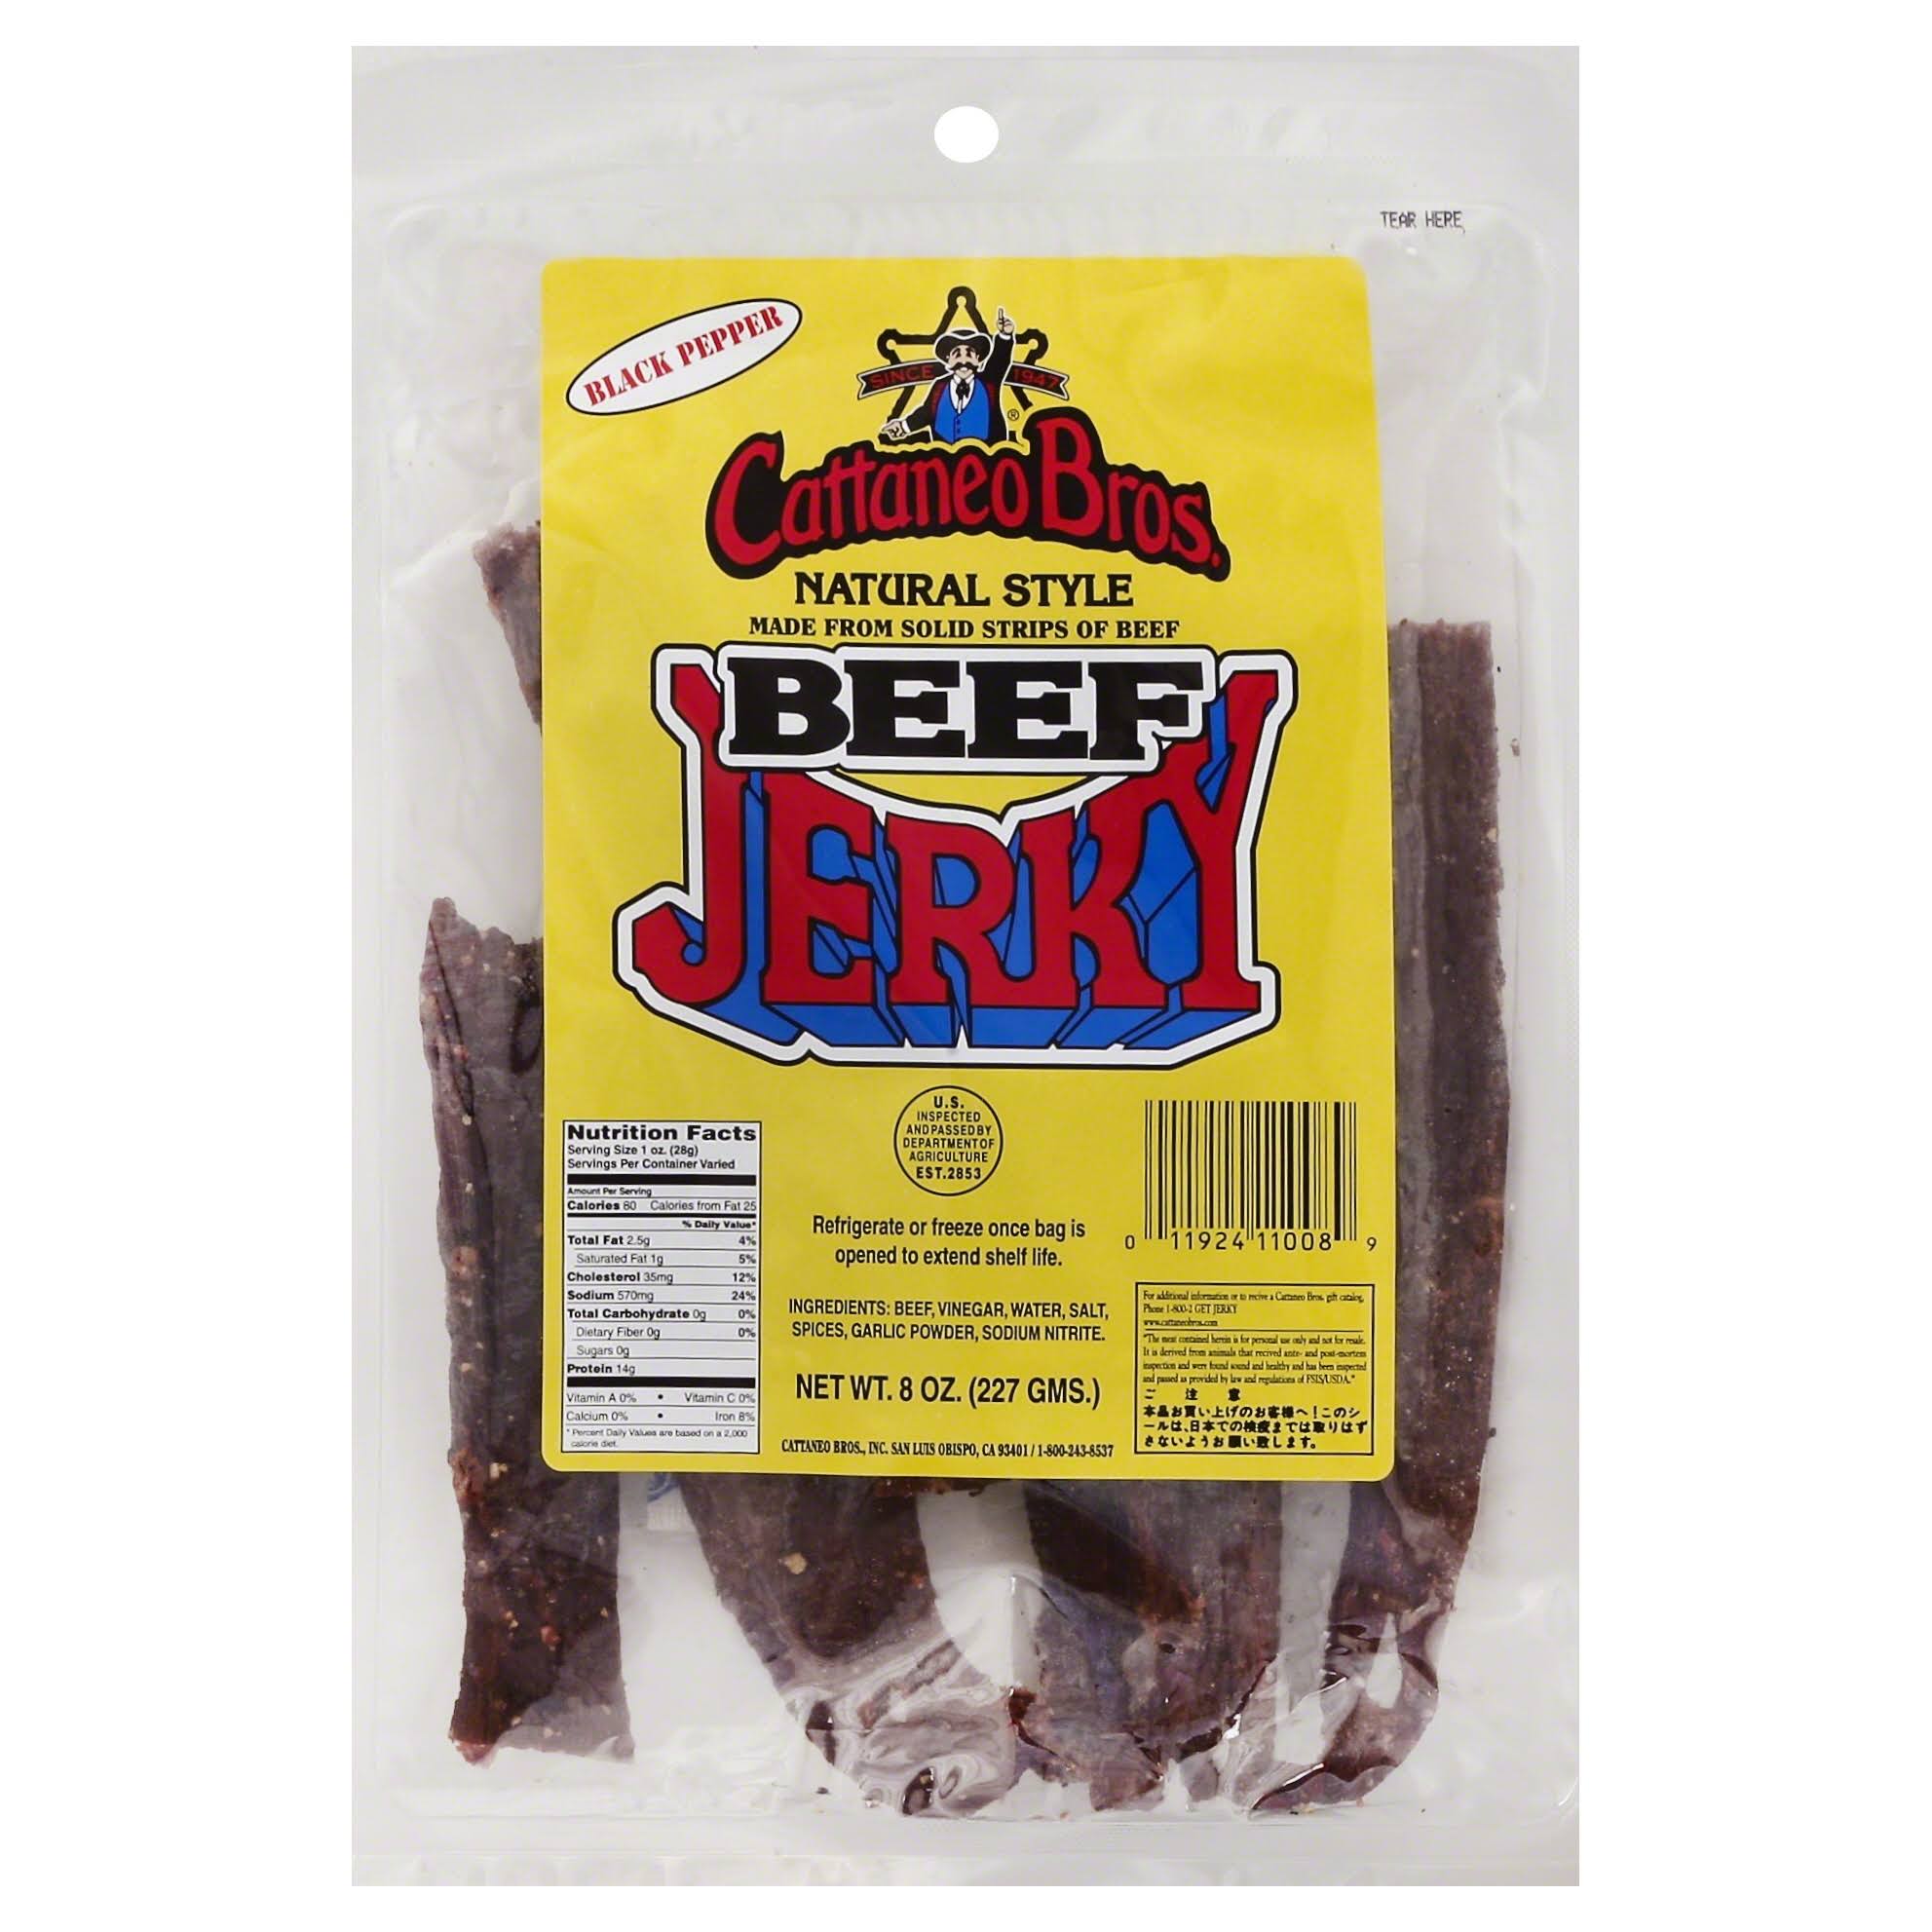 Cattaneo Bros Beef Jerky, Natural Style, Black Pepper - 8 oz